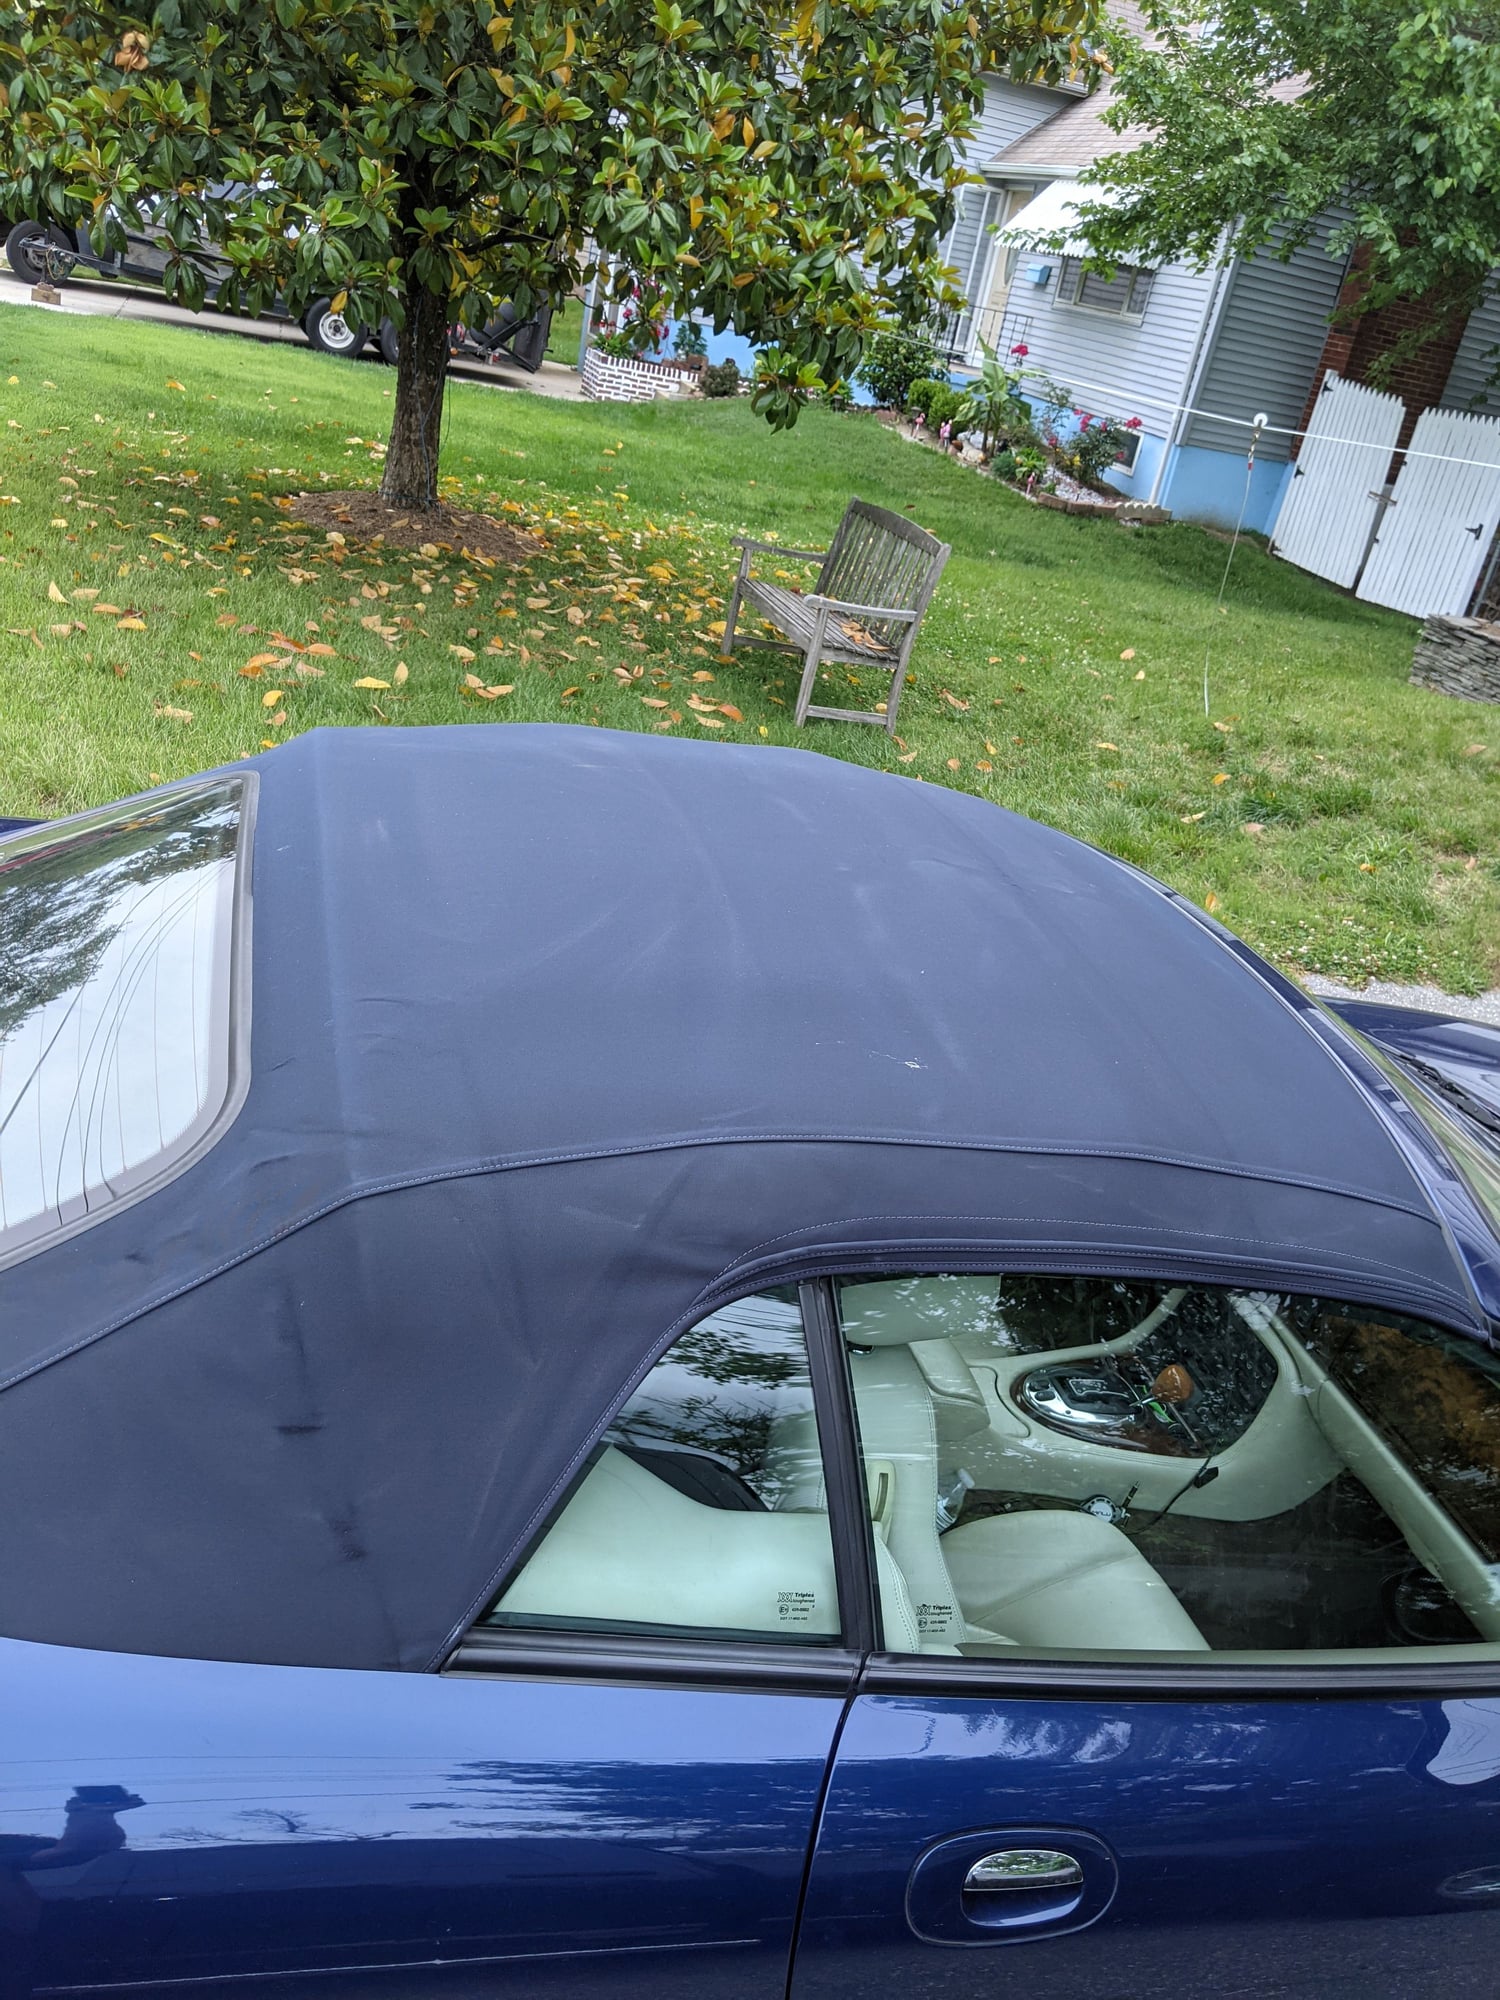 2006 Jaguar XK8 - Just in time for Summer in a Drop-Top - Used - VIN SAJDA42CX62A46434 - 89,000 Miles - 8 cyl - 2WD - Automatic - Convertible - Blue - College Park, MD 20740, United States